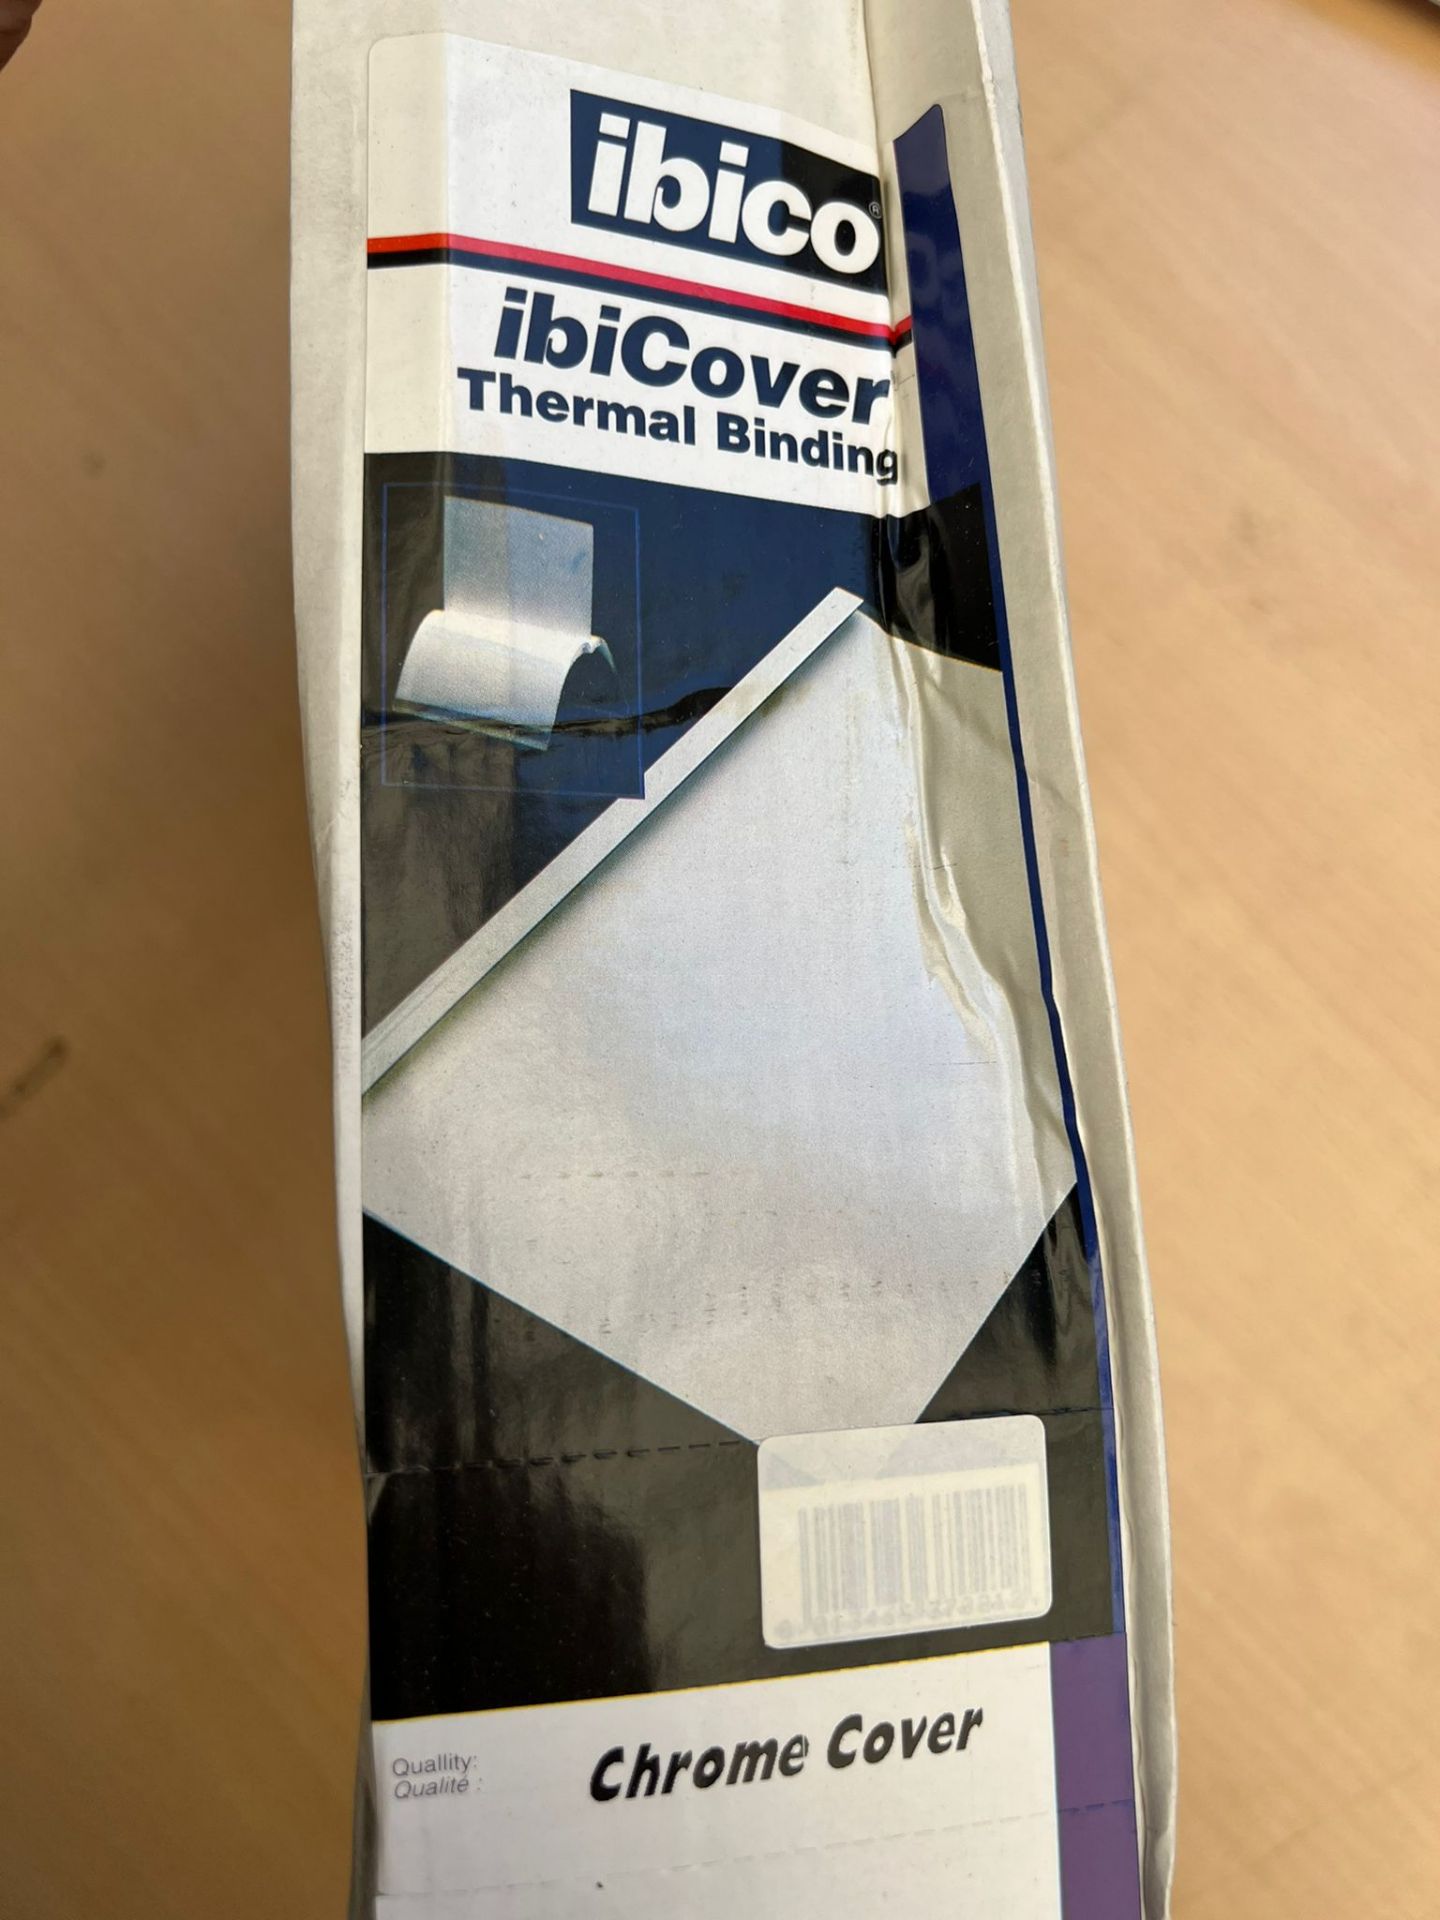 10 boxes of 15 Ibico Ibicover Thermal Binding, chrome cover *PLUS VAT* - Image 2 of 3